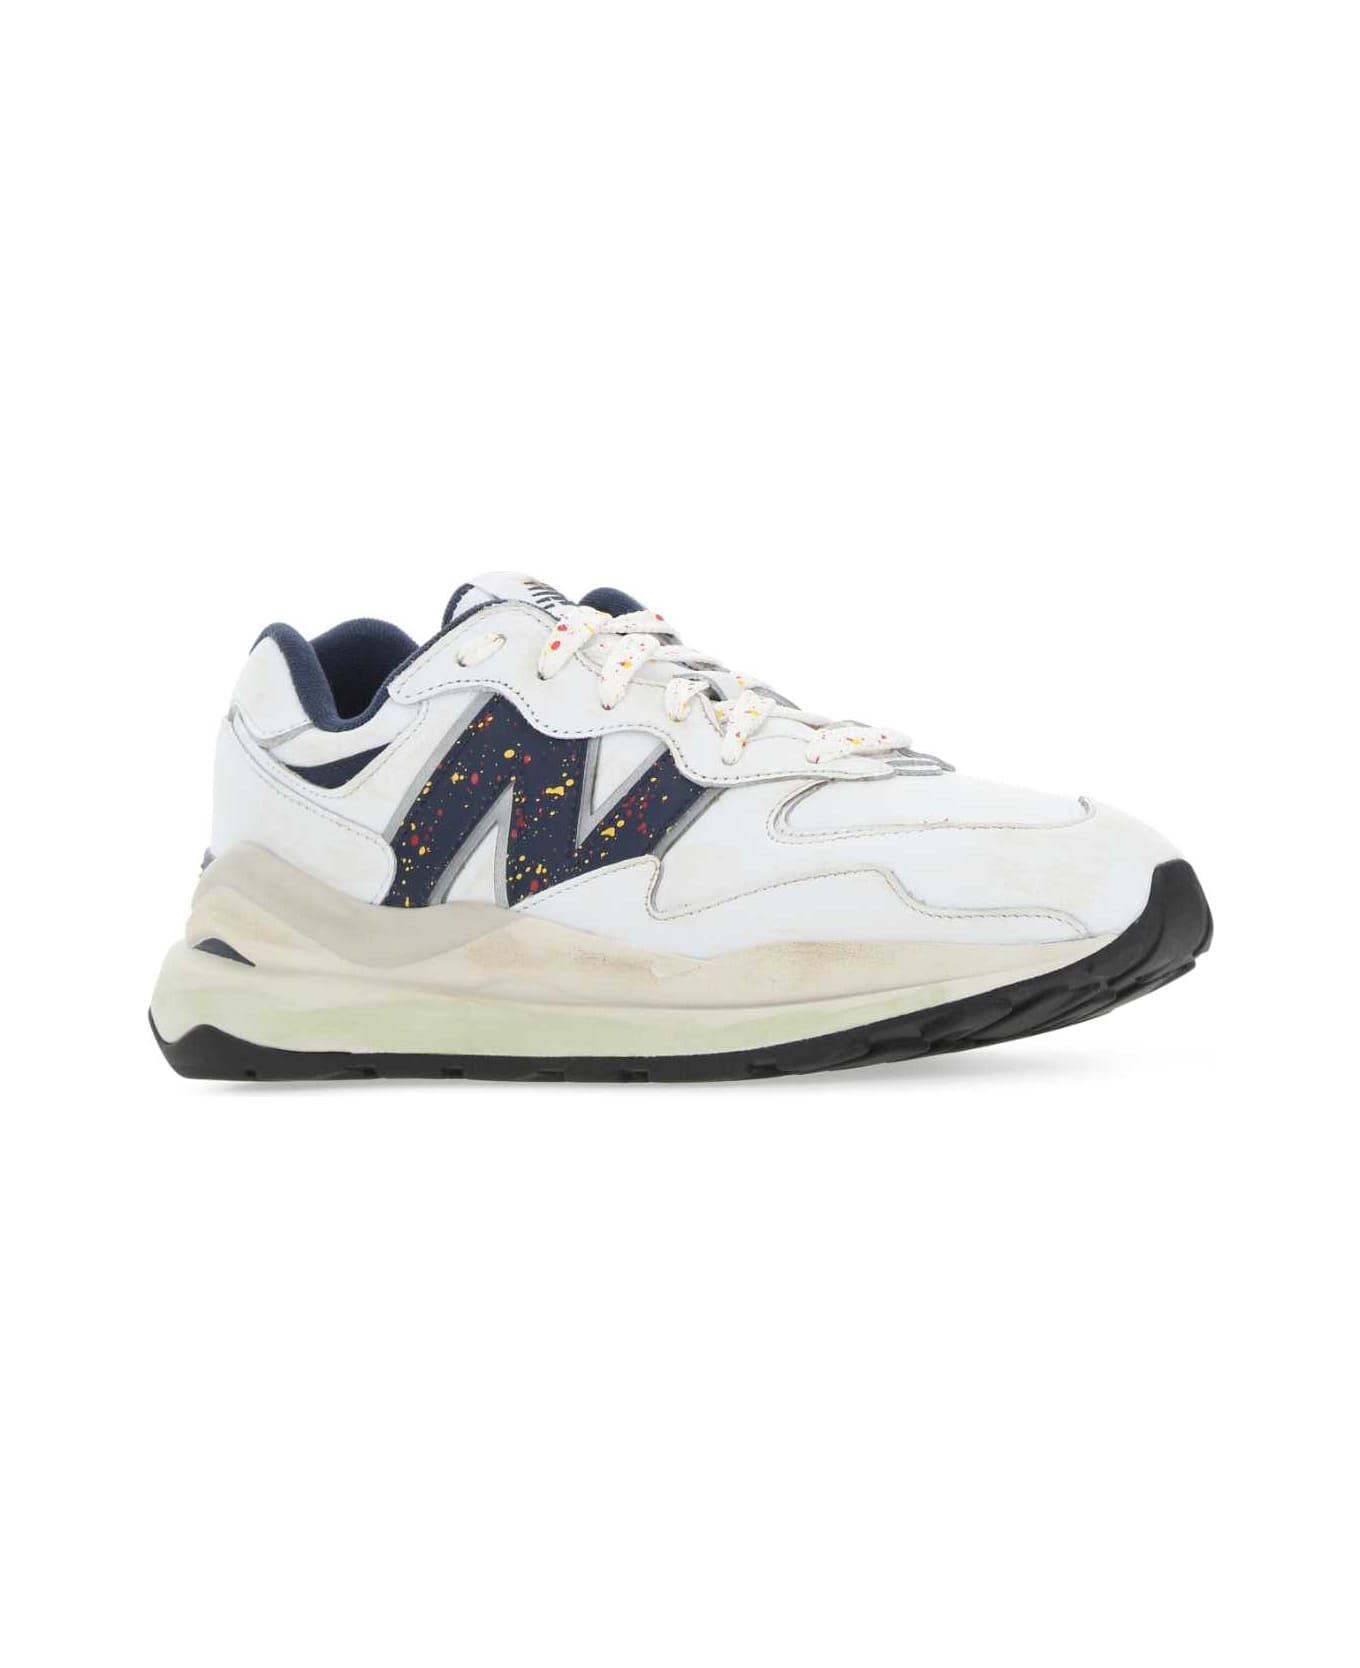 New Balance White Leather 57/40 Sneakers - WHITE